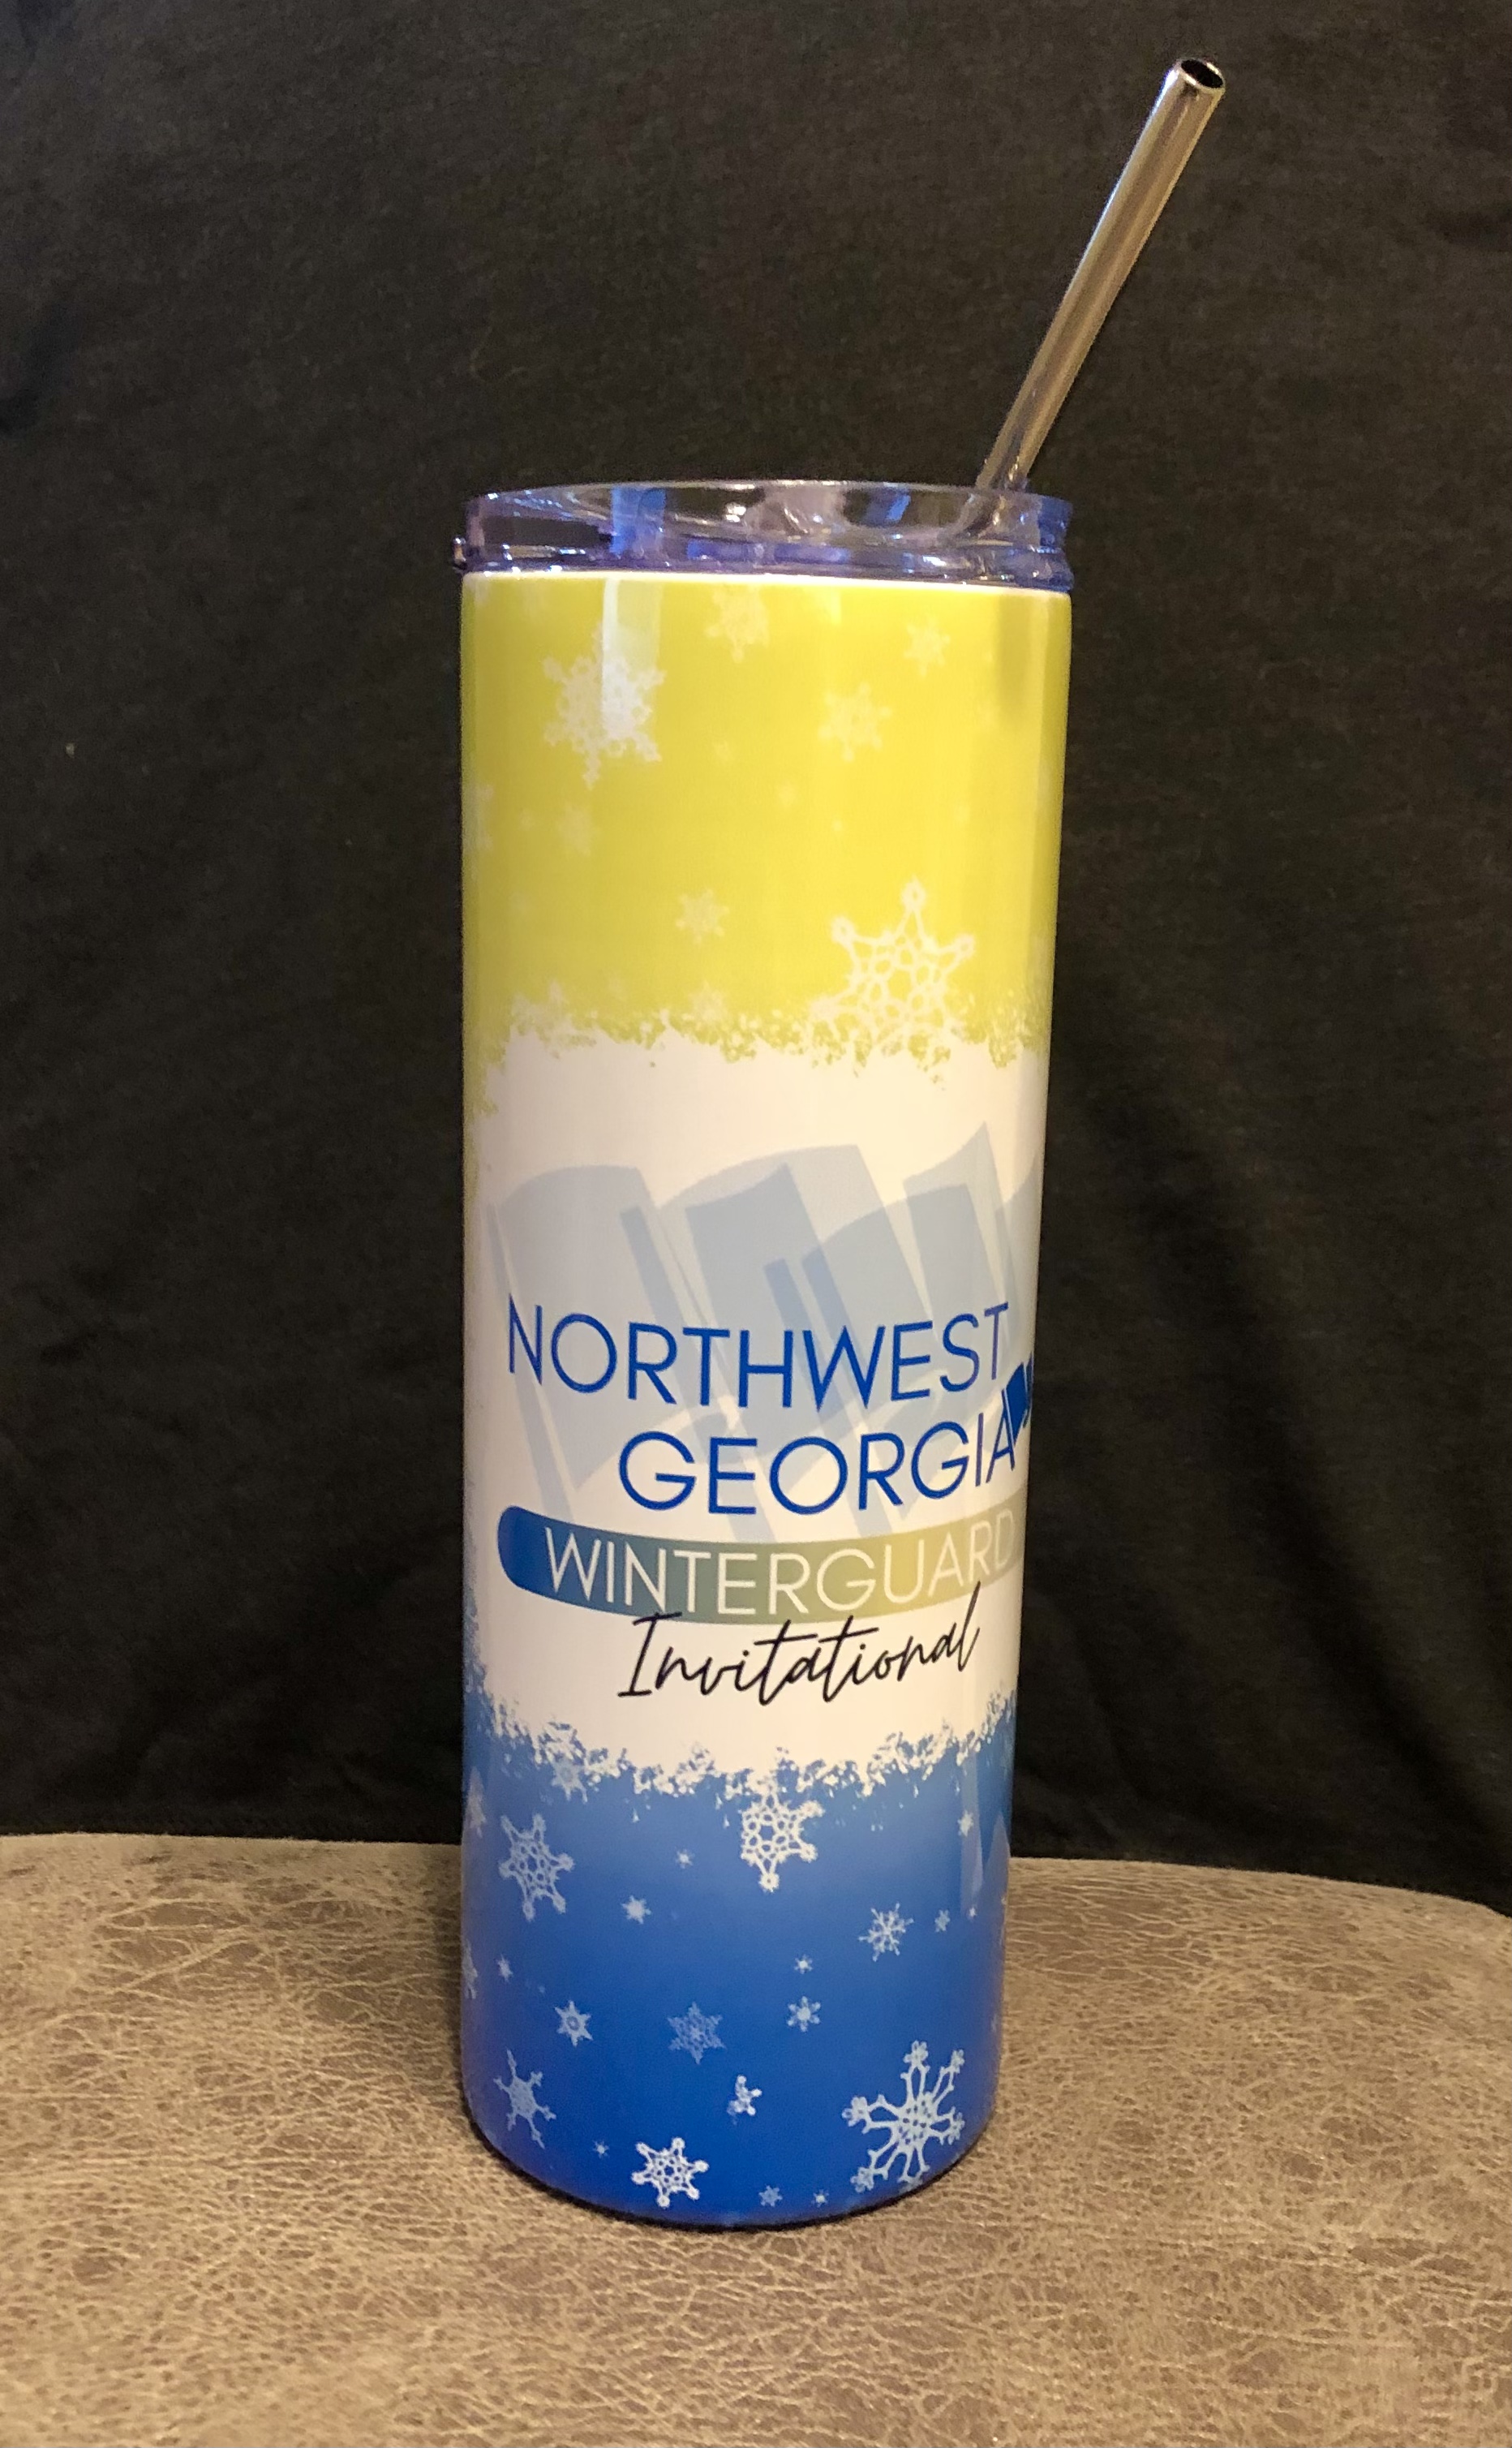 This custom tumbler was created for a local high school to give as gifts for judges at a Winter